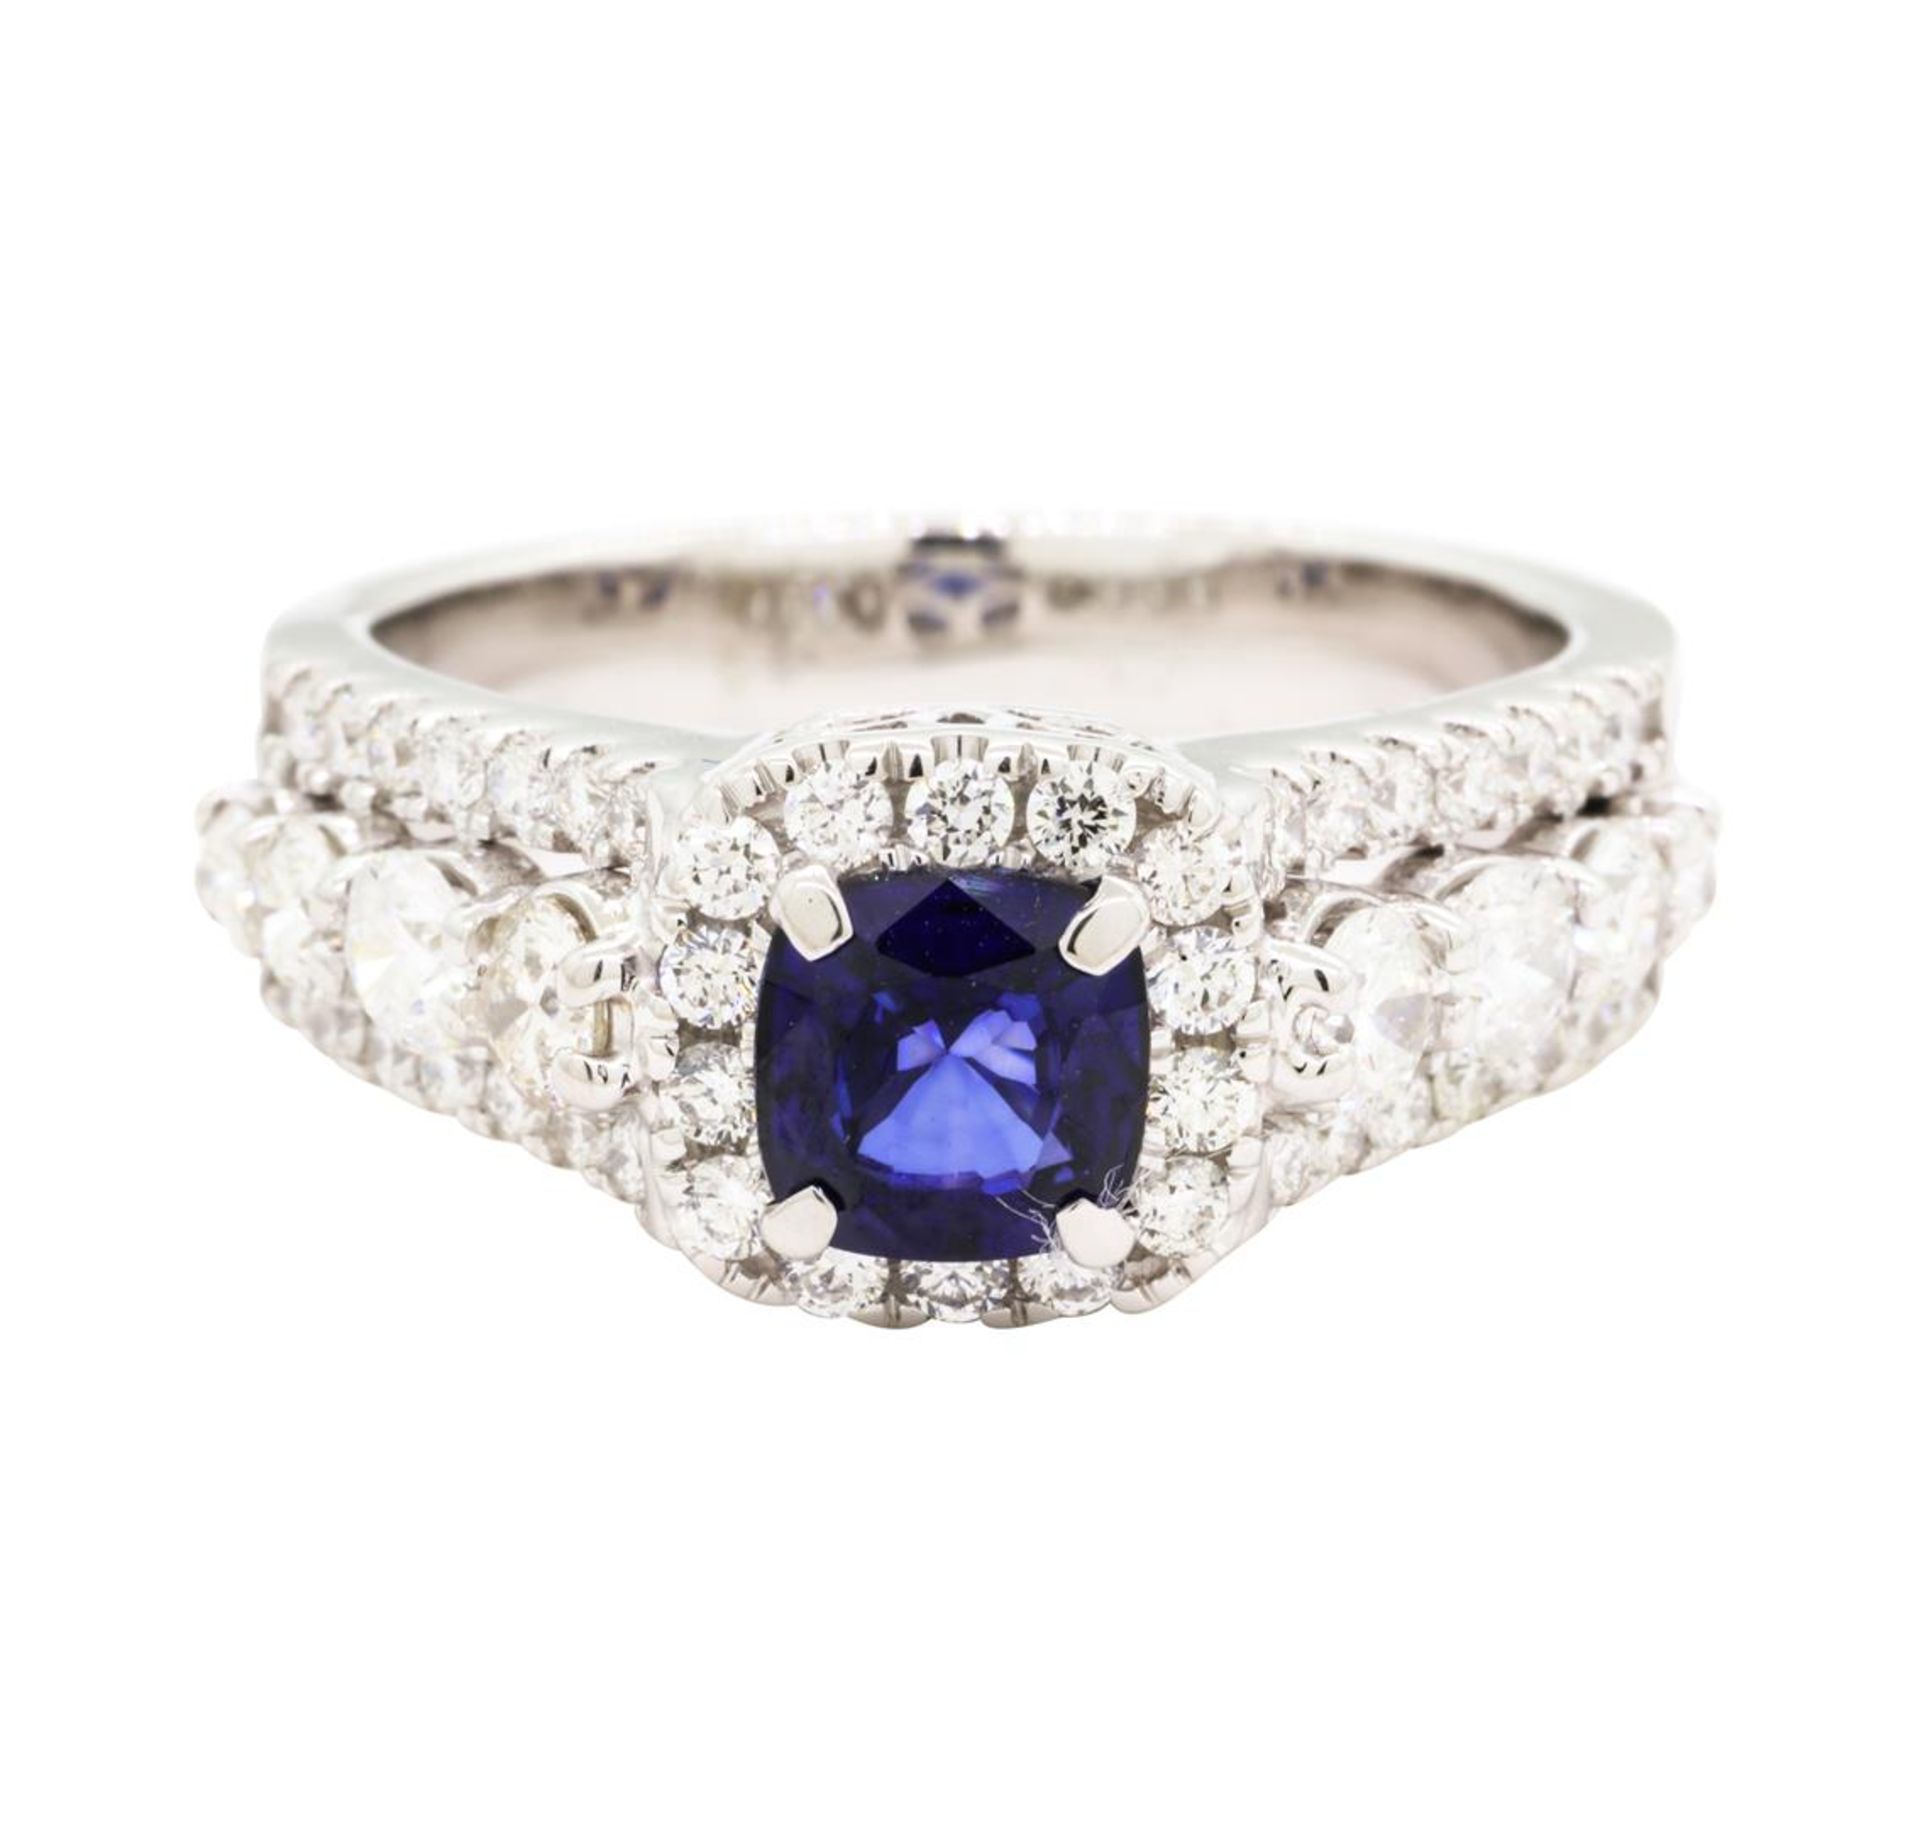 1.86 ctw Sapphire and Diamond Ring - 14KT White Gold - Image 2 of 5